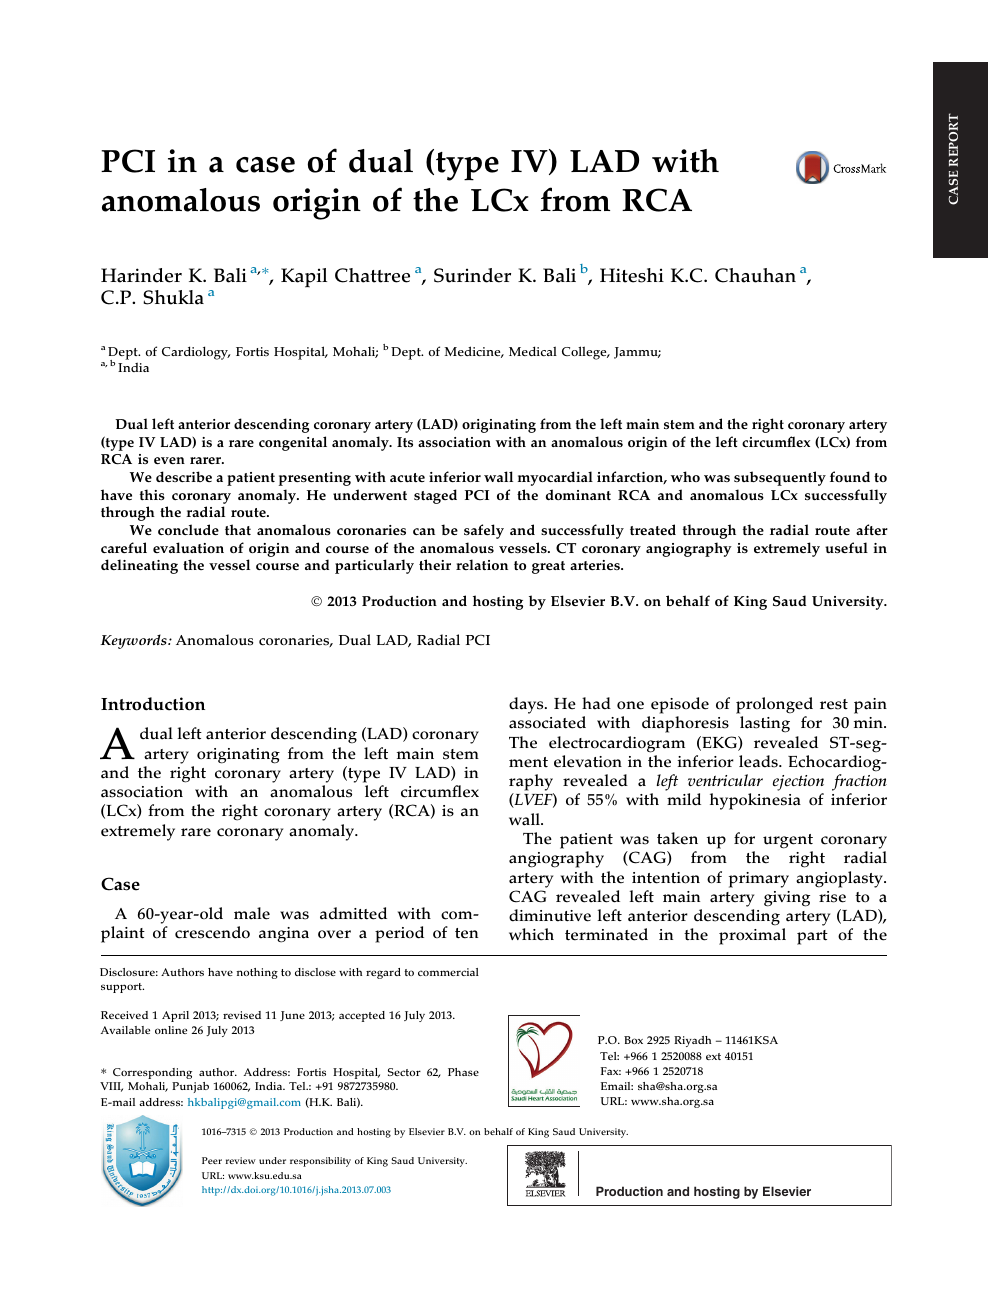 Pci In A Case Of Dual Type Iv Lad With Anomalous Origin Of The Lcx From Rca Topic Of Research Paper In Clinical Medicine Download Scholarly Article Pdf And Read For